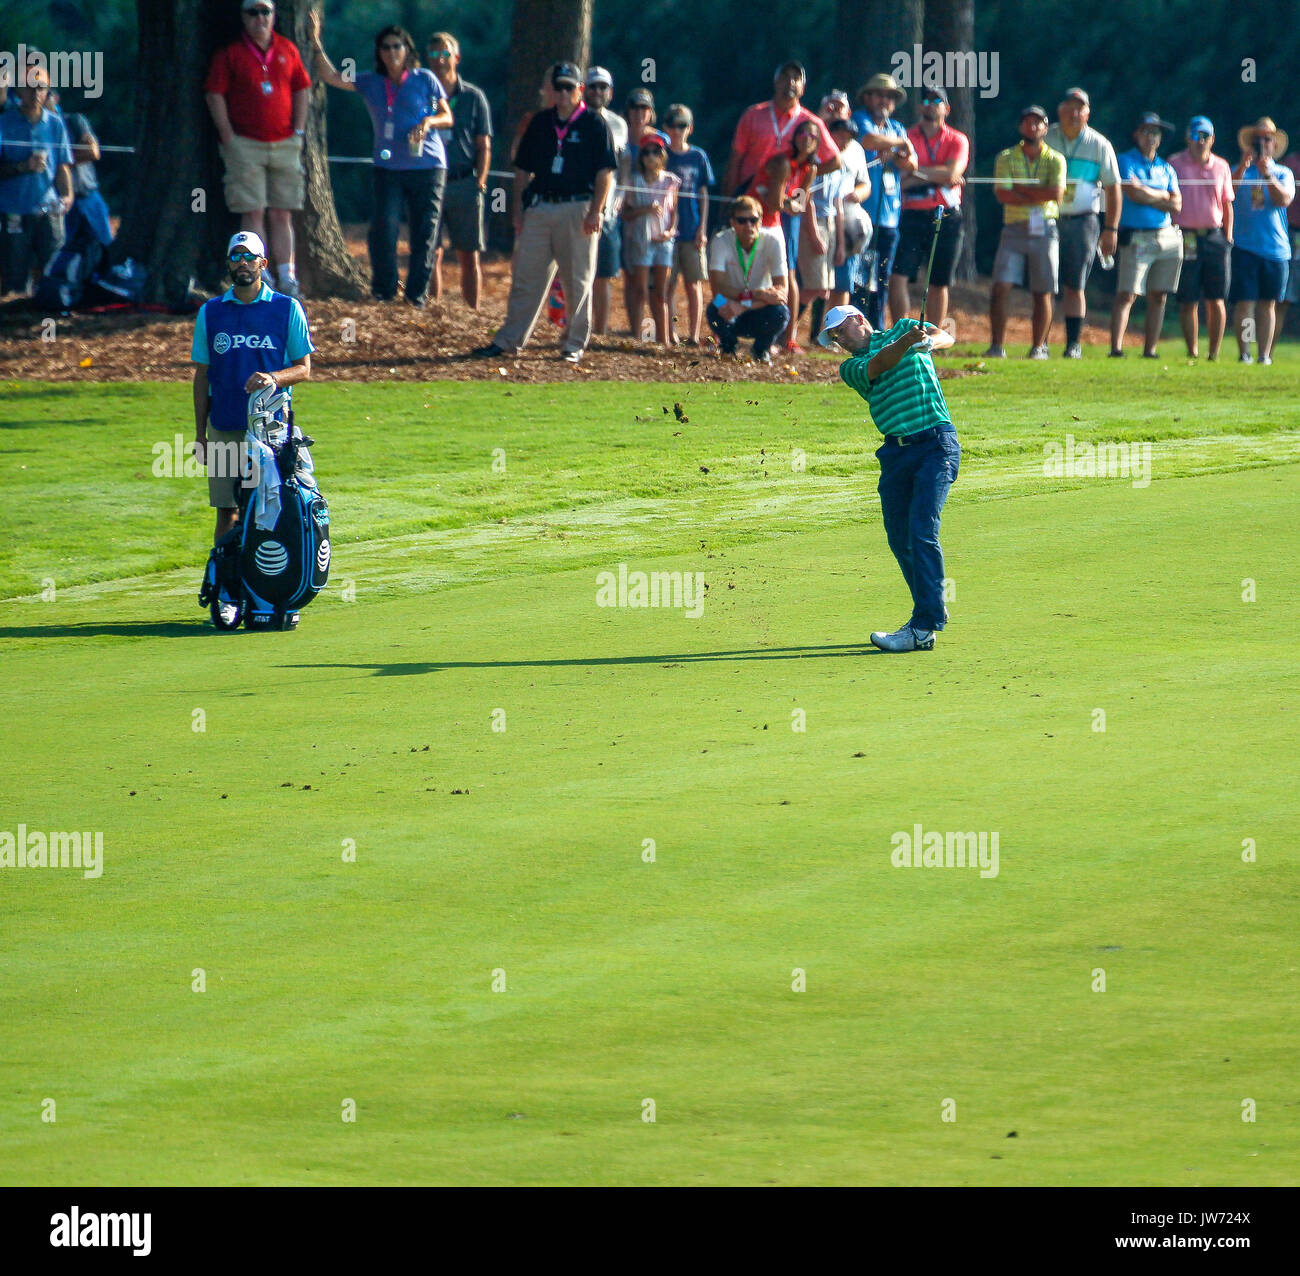 August 9, 2017: Jordan Spieth of the United States gets ready to hit from  the 15th tee during the final practice day of the 99th PGA Championship at Quail  Hollow Club in